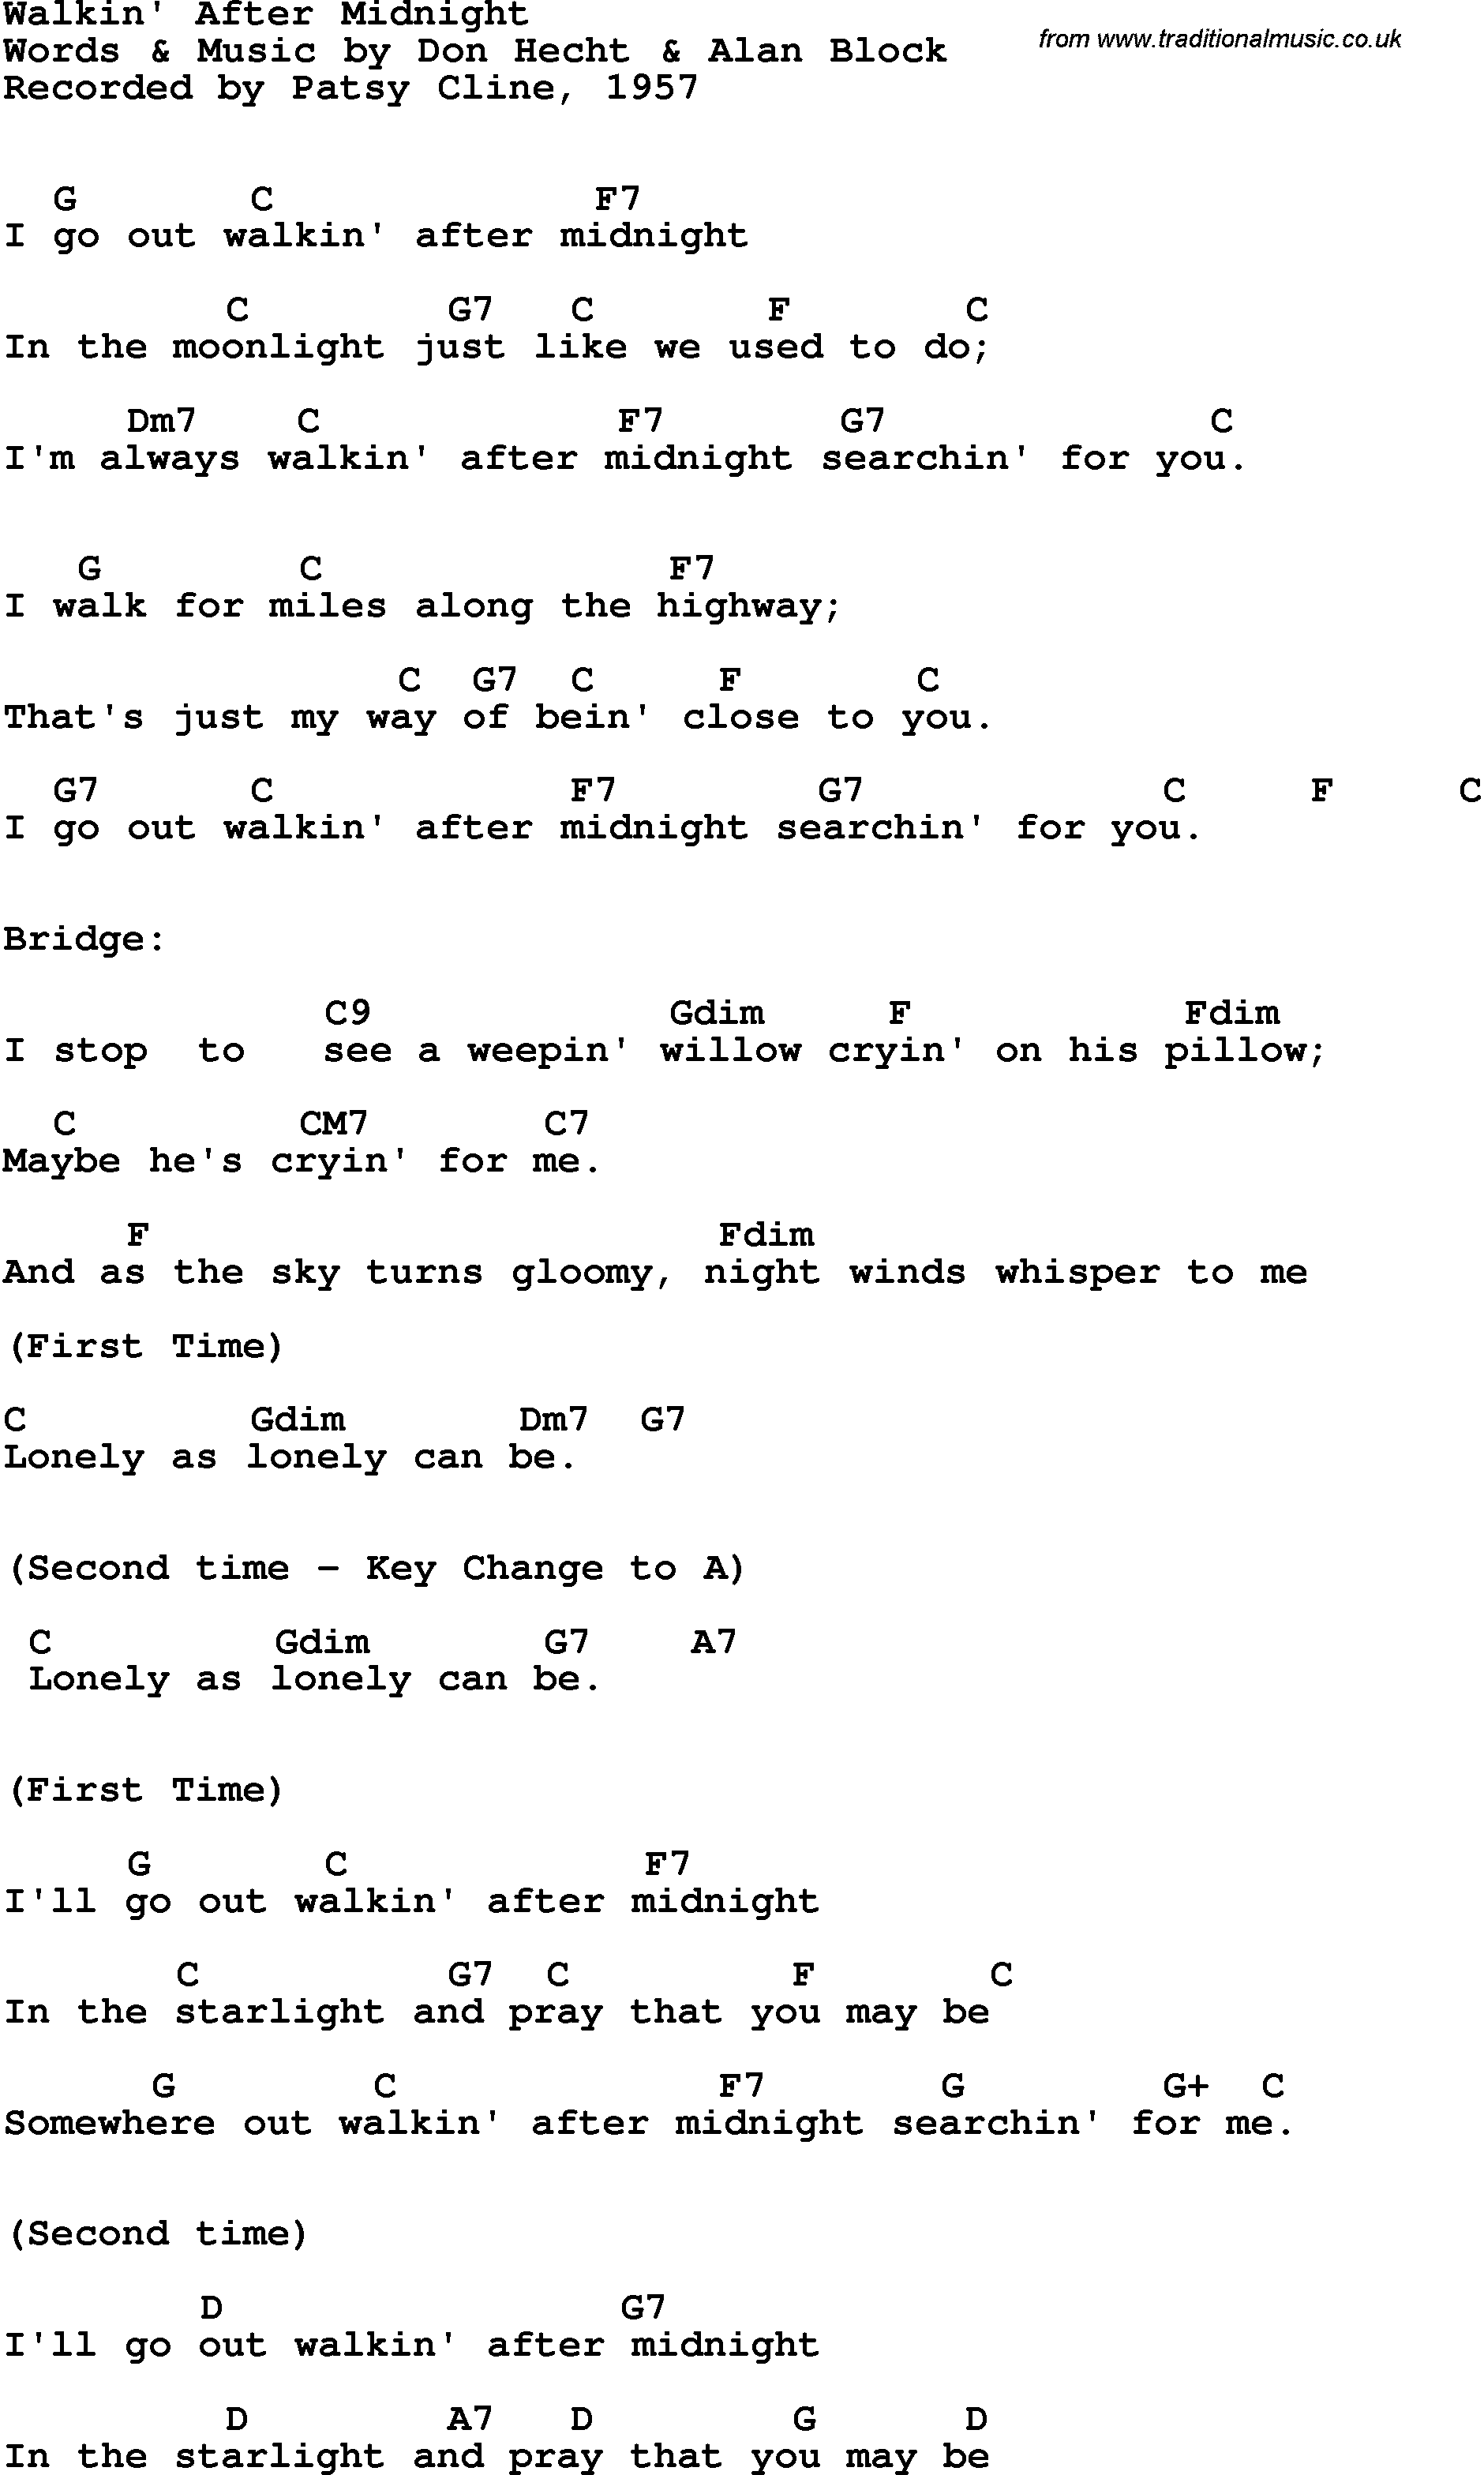 Song Lyrics with guitar chords for Walkin' After Midnight - Patsy Cline, 1957